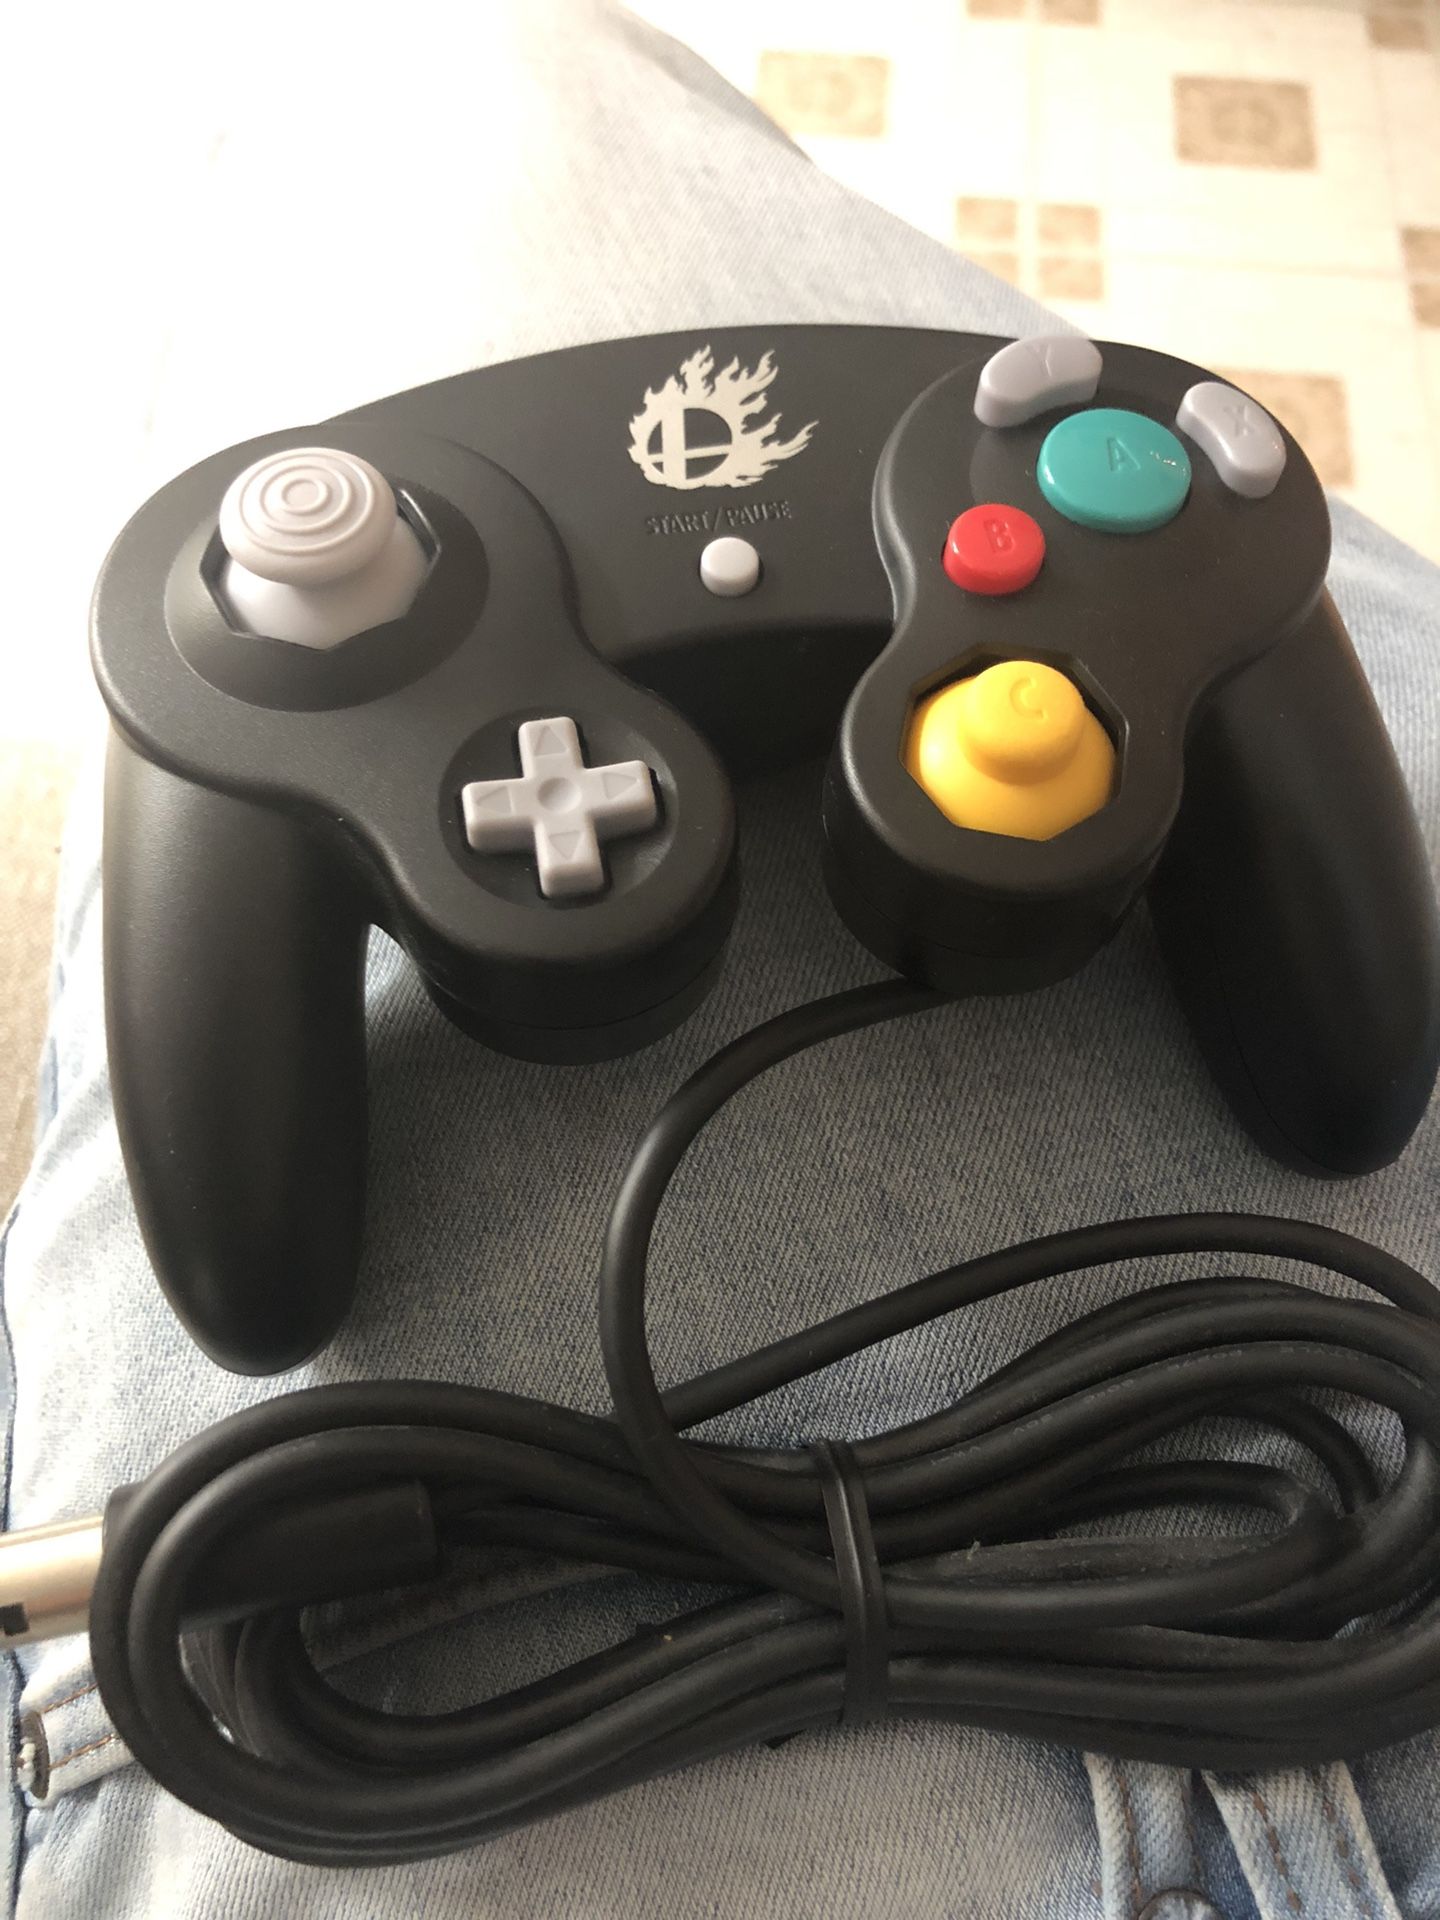 Super Smash Bros Controller (Need It Sold By Today)